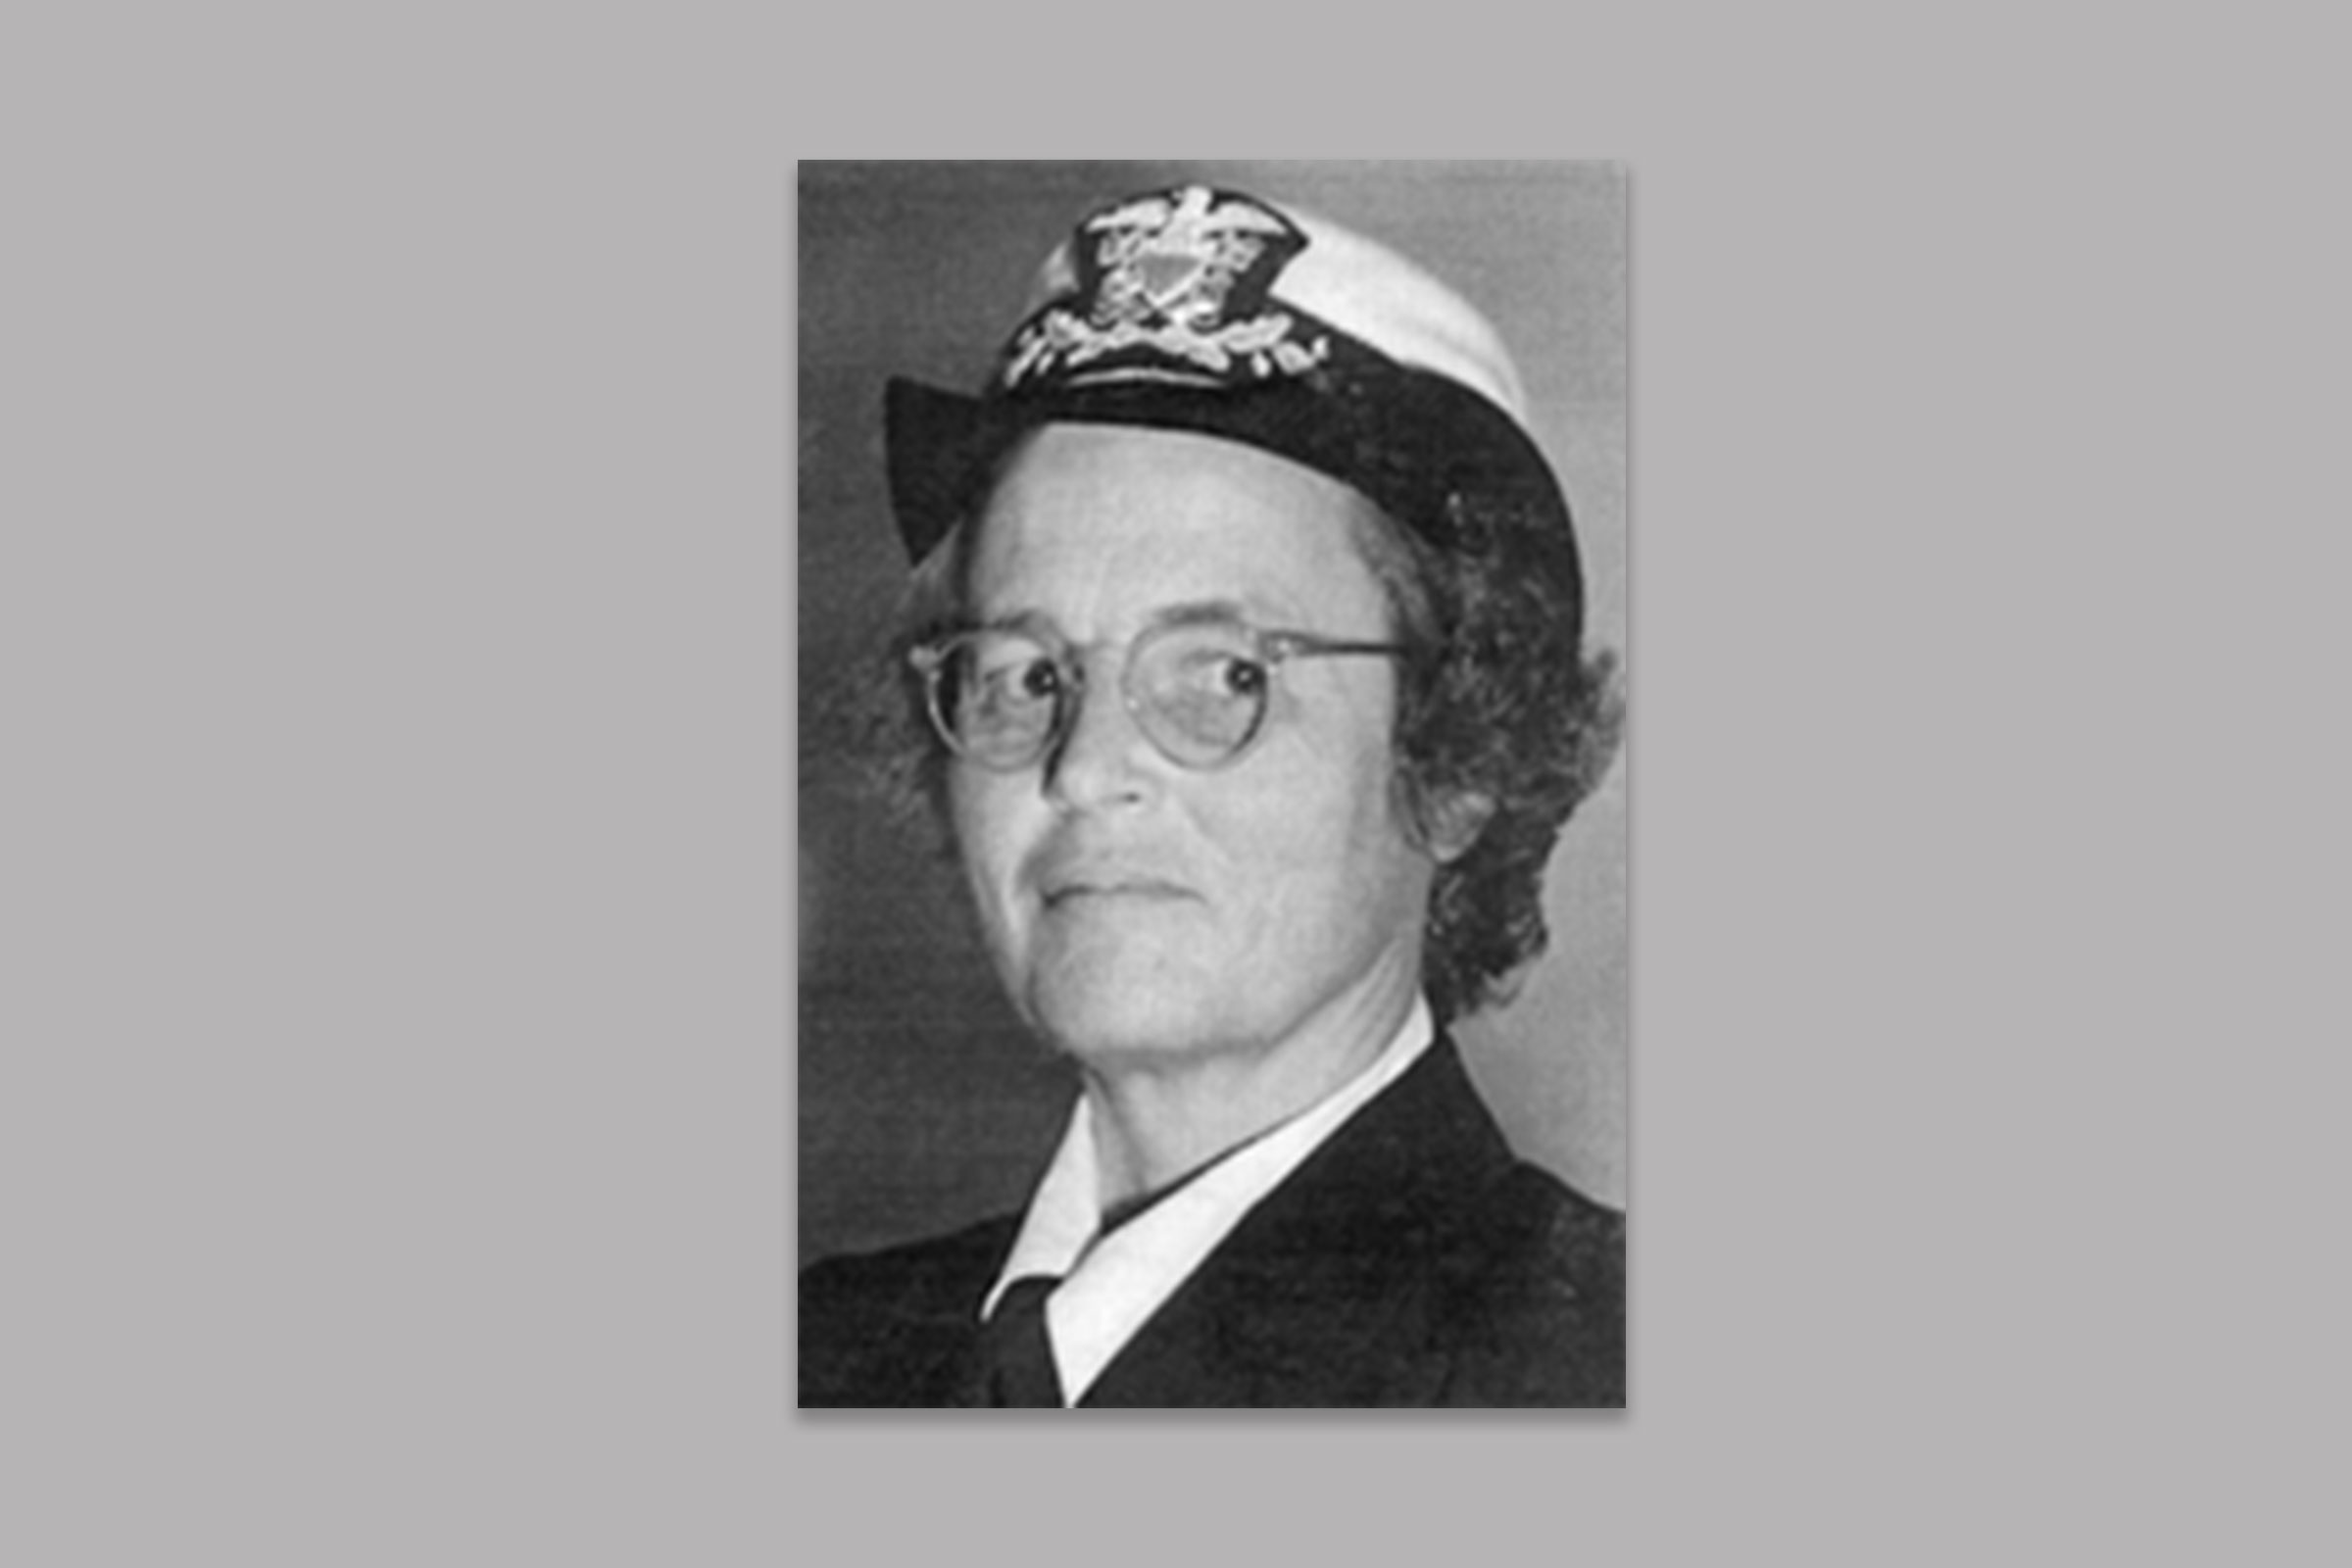 A US Navy portrait of Mary Sears